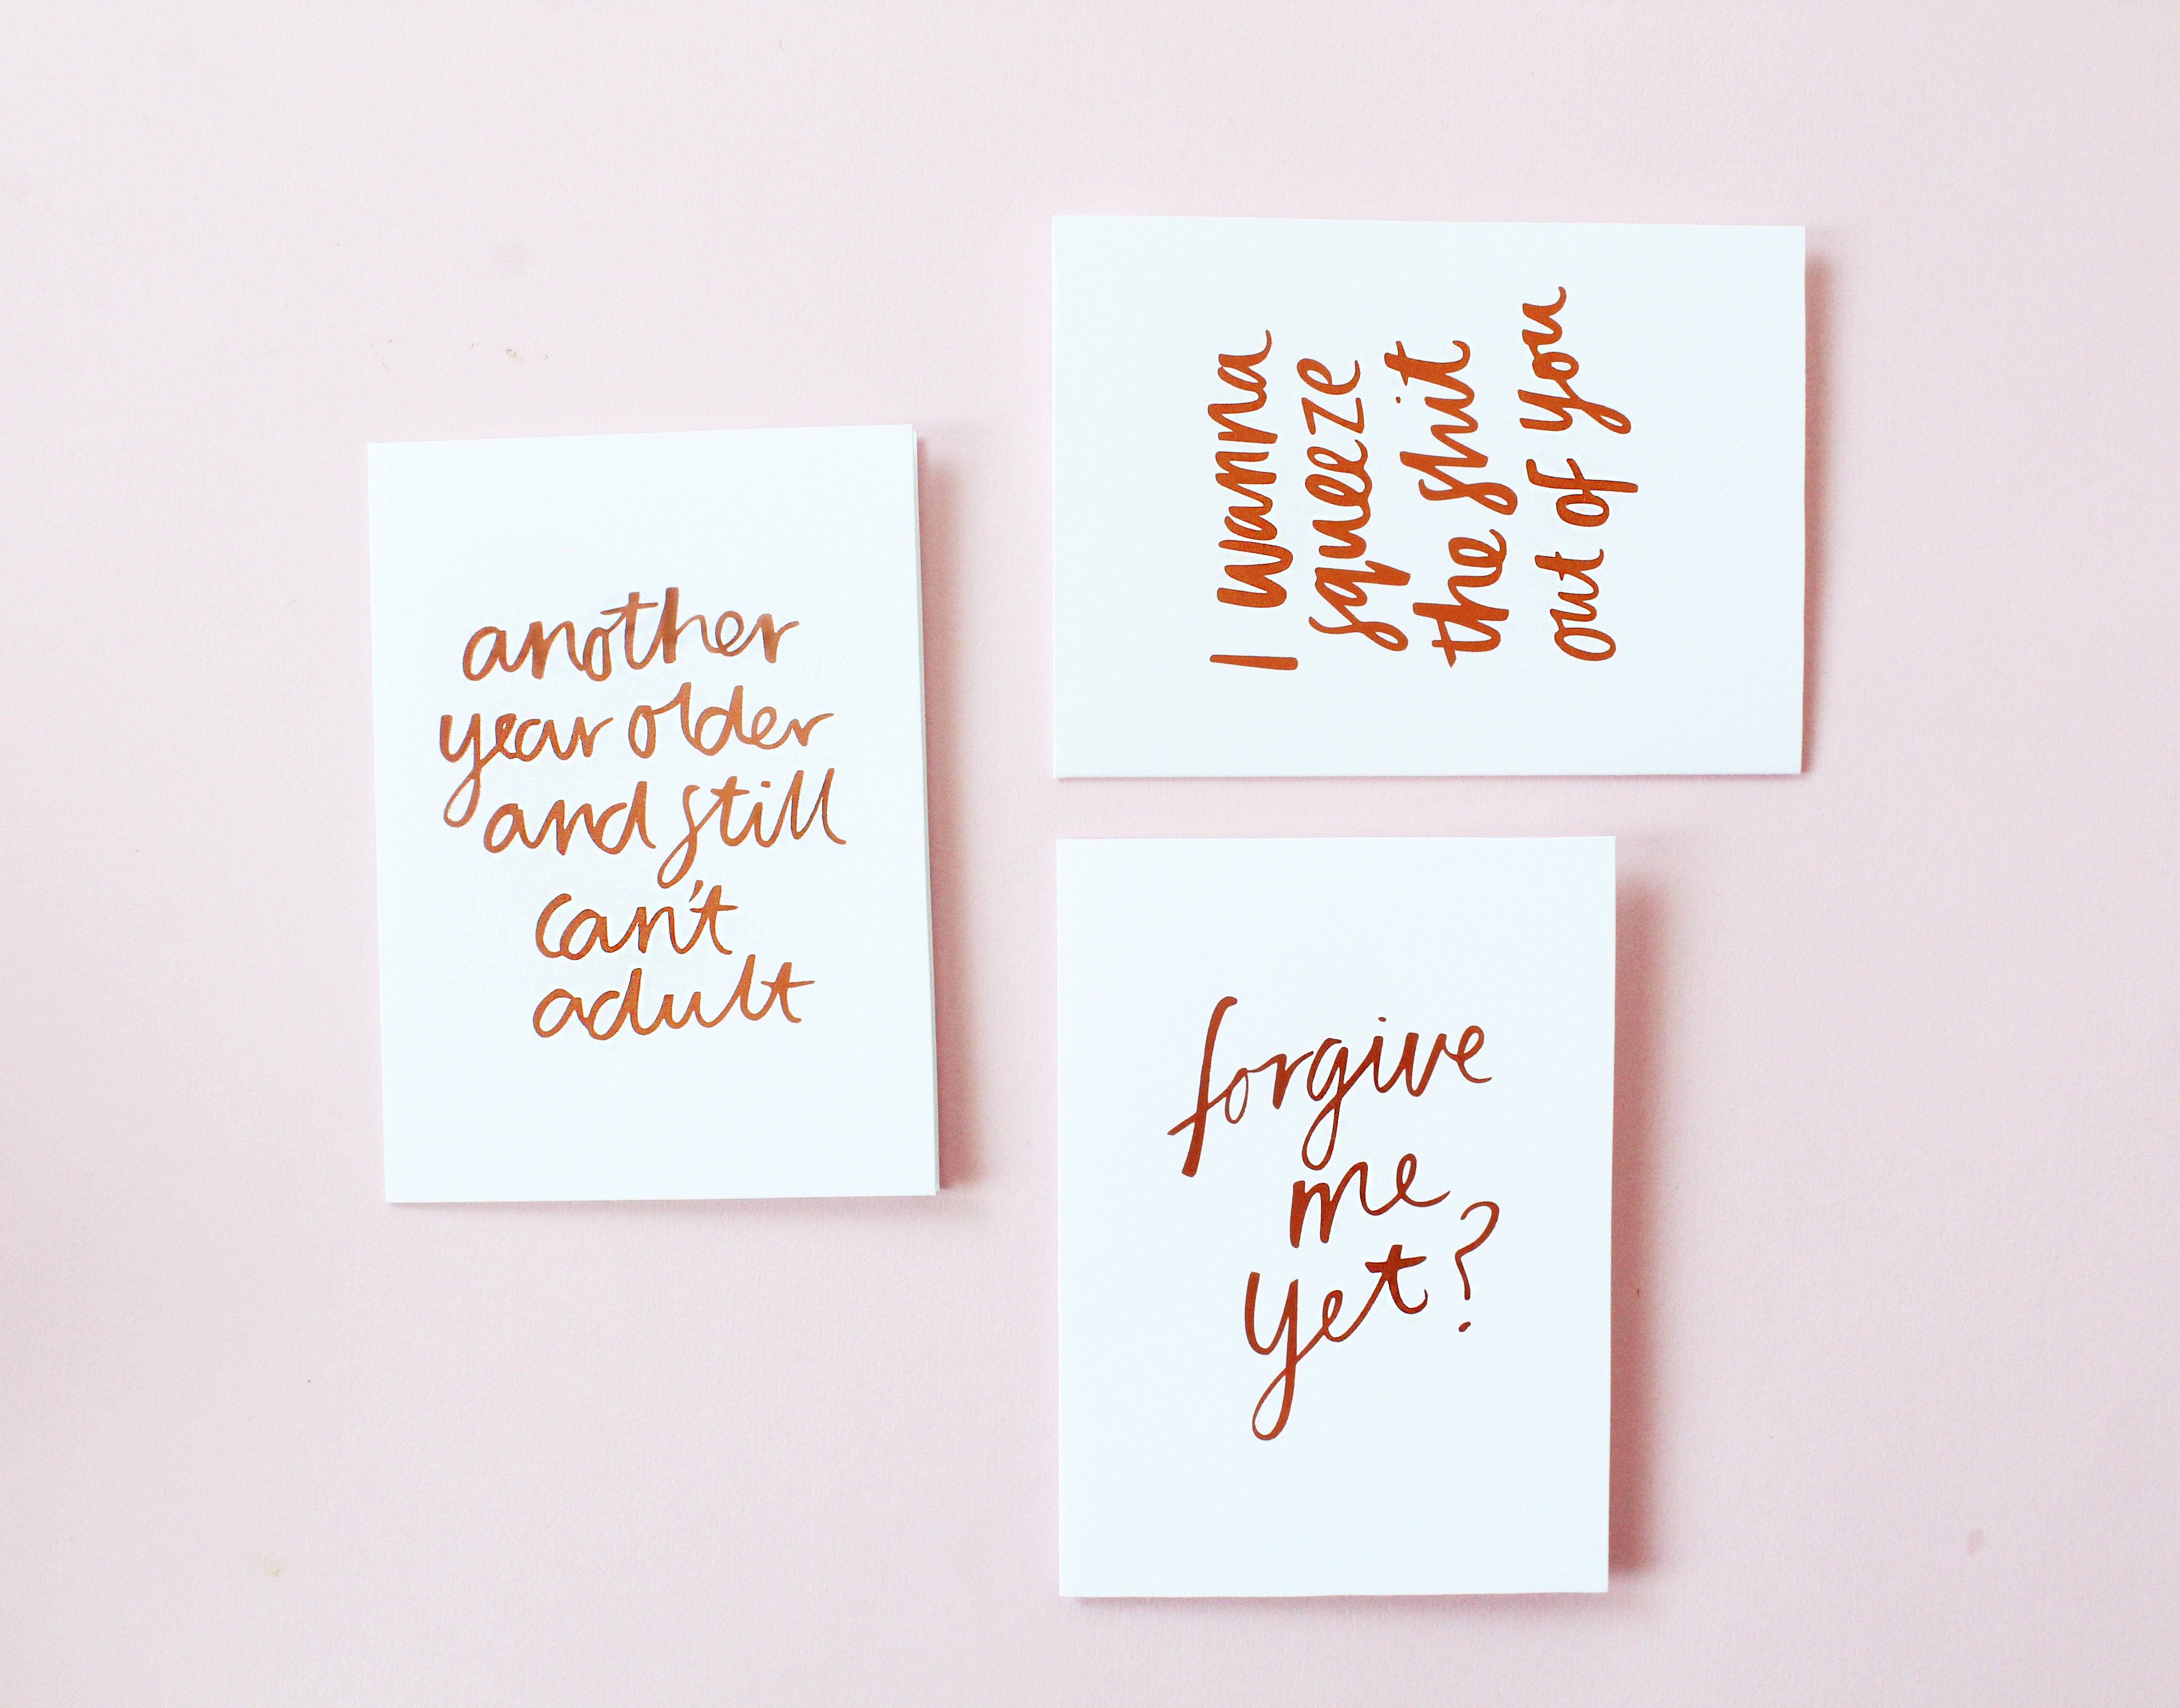 Squeeze You! foiled greeting card | Blushing Confetti